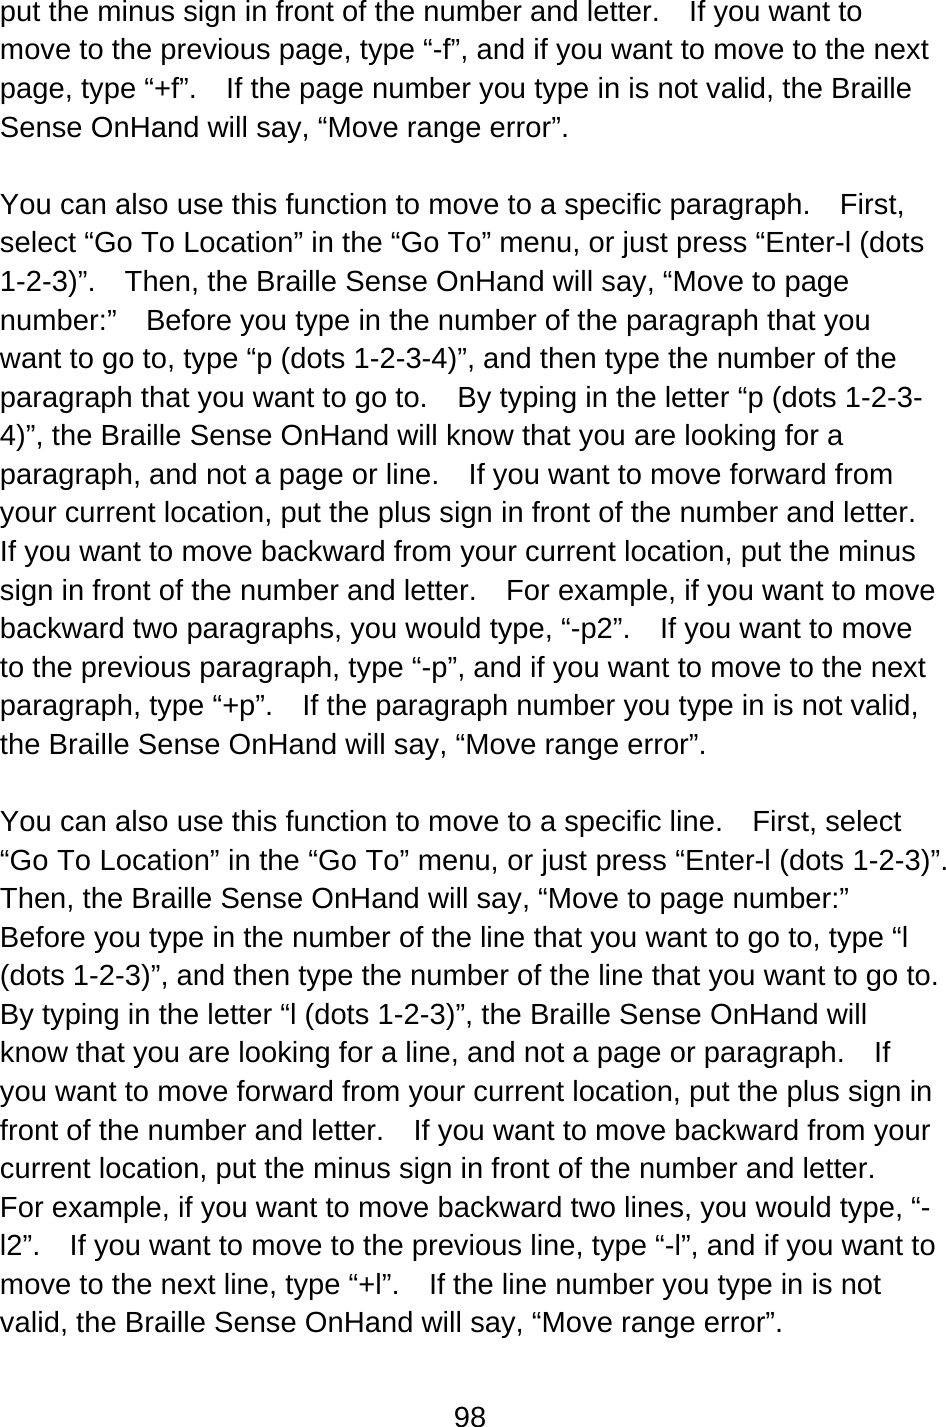 98  put the minus sign in front of the number and letter.    If you want to move to the previous page, type “-f”, and if you want to move to the next page, type “+f”.    If the page number you type in is not valid, the Braille Sense OnHand will say, “Move range error”.  You can also use this function to move to a specific paragraph.    First, select “Go To Location” in the “Go To” menu, or just press “Enter-l (dots 1-2-3)”.    Then, the Braille Sense OnHand will say, “Move to page number:”    Before you type in the number of the paragraph that you want to go to, type “p (dots 1-2-3-4)”, and then type the number of the paragraph that you want to go to.    By typing in the letter “p (dots 1-2-3-4)”, the Braille Sense OnHand will know that you are looking for a paragraph, and not a page or line.    If you want to move forward from your current location, put the plus sign in front of the number and letter.   If you want to move backward from your current location, put the minus sign in front of the number and letter.  For example, if you want to move backward two paragraphs, you would type, “-p2”.    If you want to move to the previous paragraph, type “-p”, and if you want to move to the next paragraph, type “+p”.    If the paragraph number you type in is not valid, the Braille Sense OnHand will say, “Move range error”.  You can also use this function to move to a specific line.    First, select “Go To Location” in the “Go To” menu, or just press “Enter-l (dots 1-2-3)”.   Then, the Braille Sense OnHand will say, “Move to page number:”   Before you type in the number of the line that you want to go to, type “l (dots 1-2-3)”, and then type the number of the line that you want to go to.   By typing in the letter “l (dots 1-2-3)”, the Braille Sense OnHand will know that you are looking for a line, and not a page or paragraph.  If you want to move forward from your current location, put the plus sign in front of the number and letter.    If you want to move backward from your current location, put the minus sign in front of the number and letter.   For example, if you want to move backward two lines, you would type, “-l2”.    If you want to move to the previous line, type “-l”, and if you want to move to the next line, type “+l”.    If the line number you type in is not valid, the Braille Sense OnHand will say, “Move range error”.  